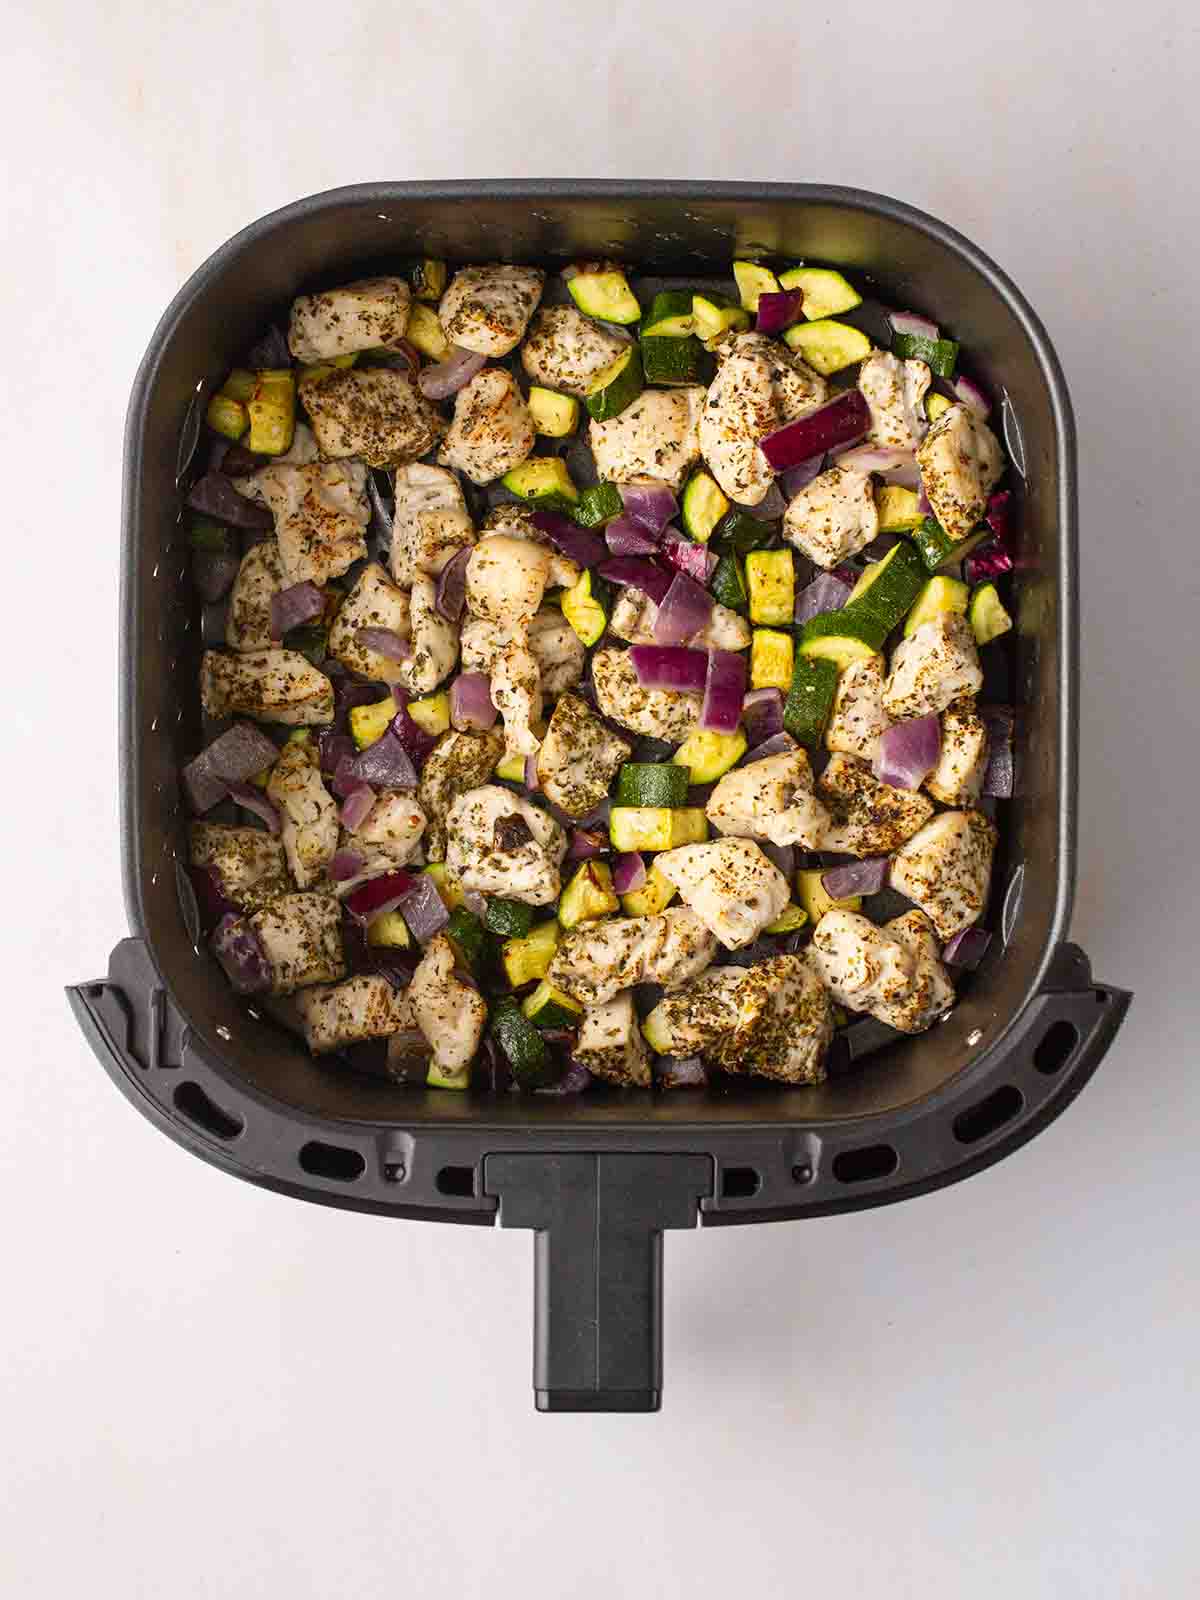 Chunks of chicken breast, red onion, courgette inside an air fryer for Greek Chicken Traybake.